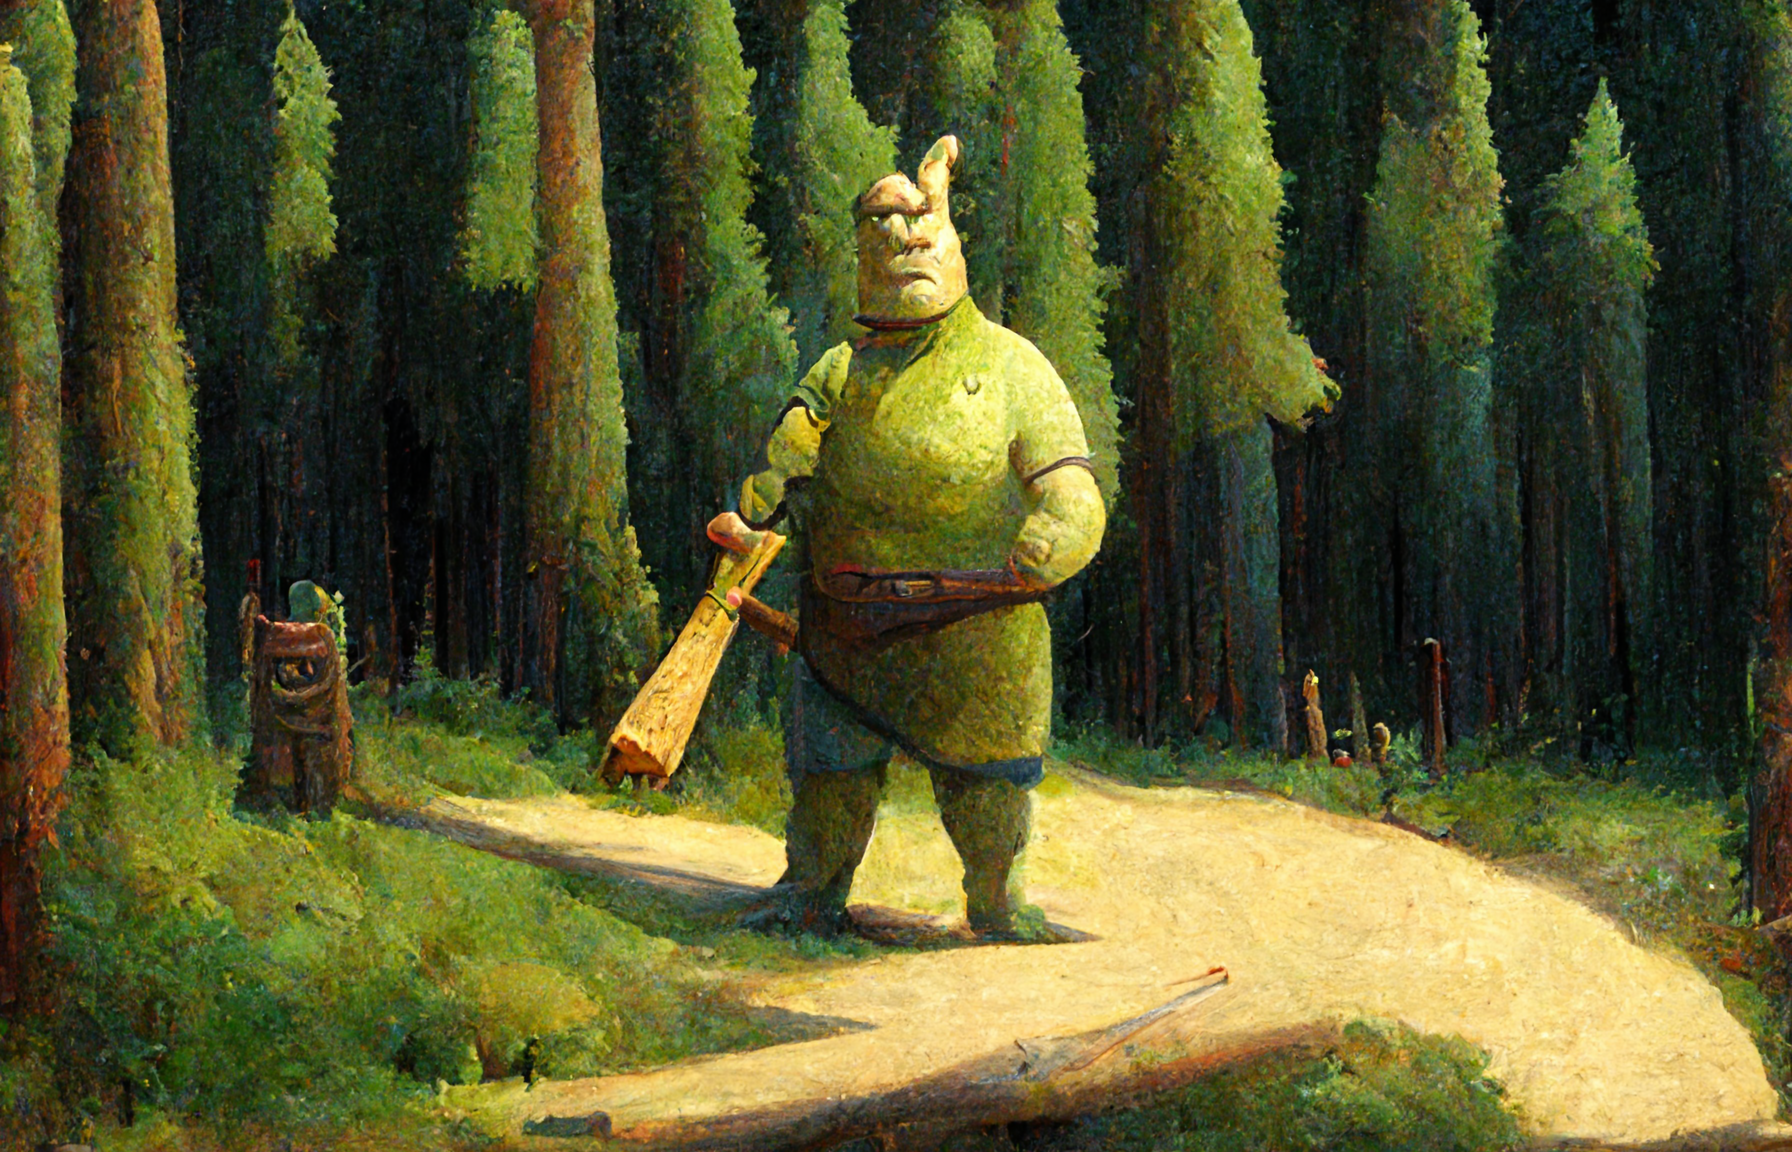 ogre holding a long wooden club on a path among pines